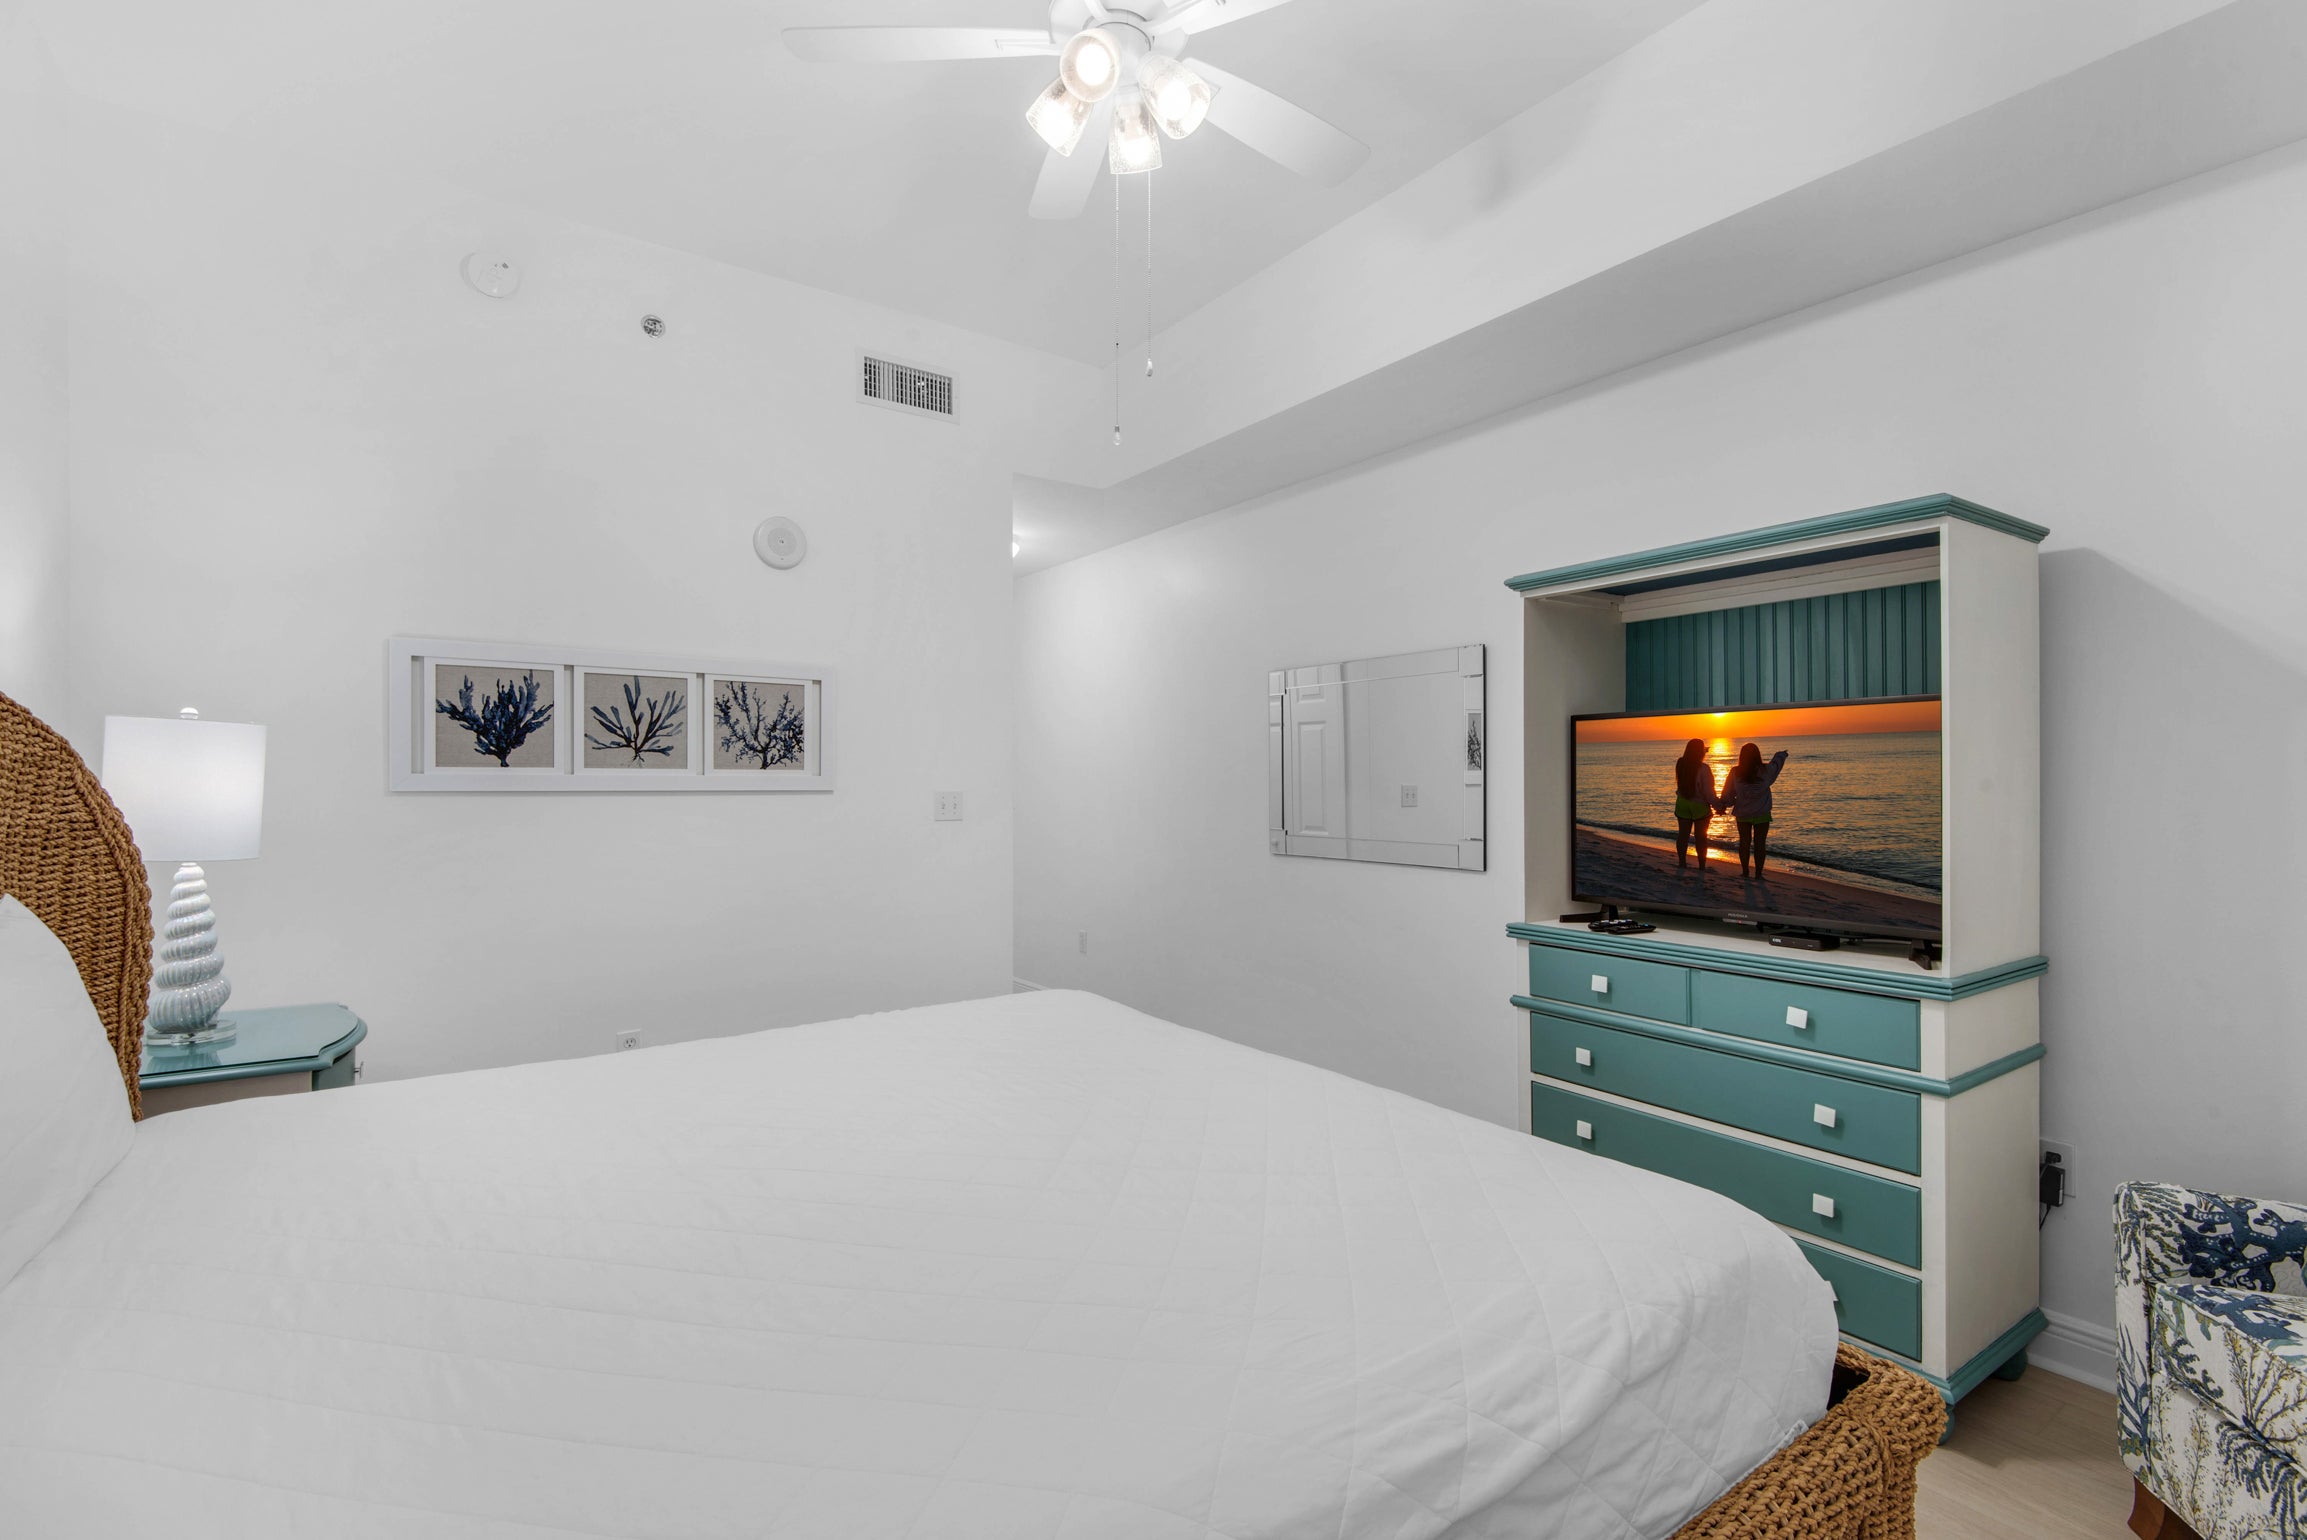 Guest bedroom with flat screen